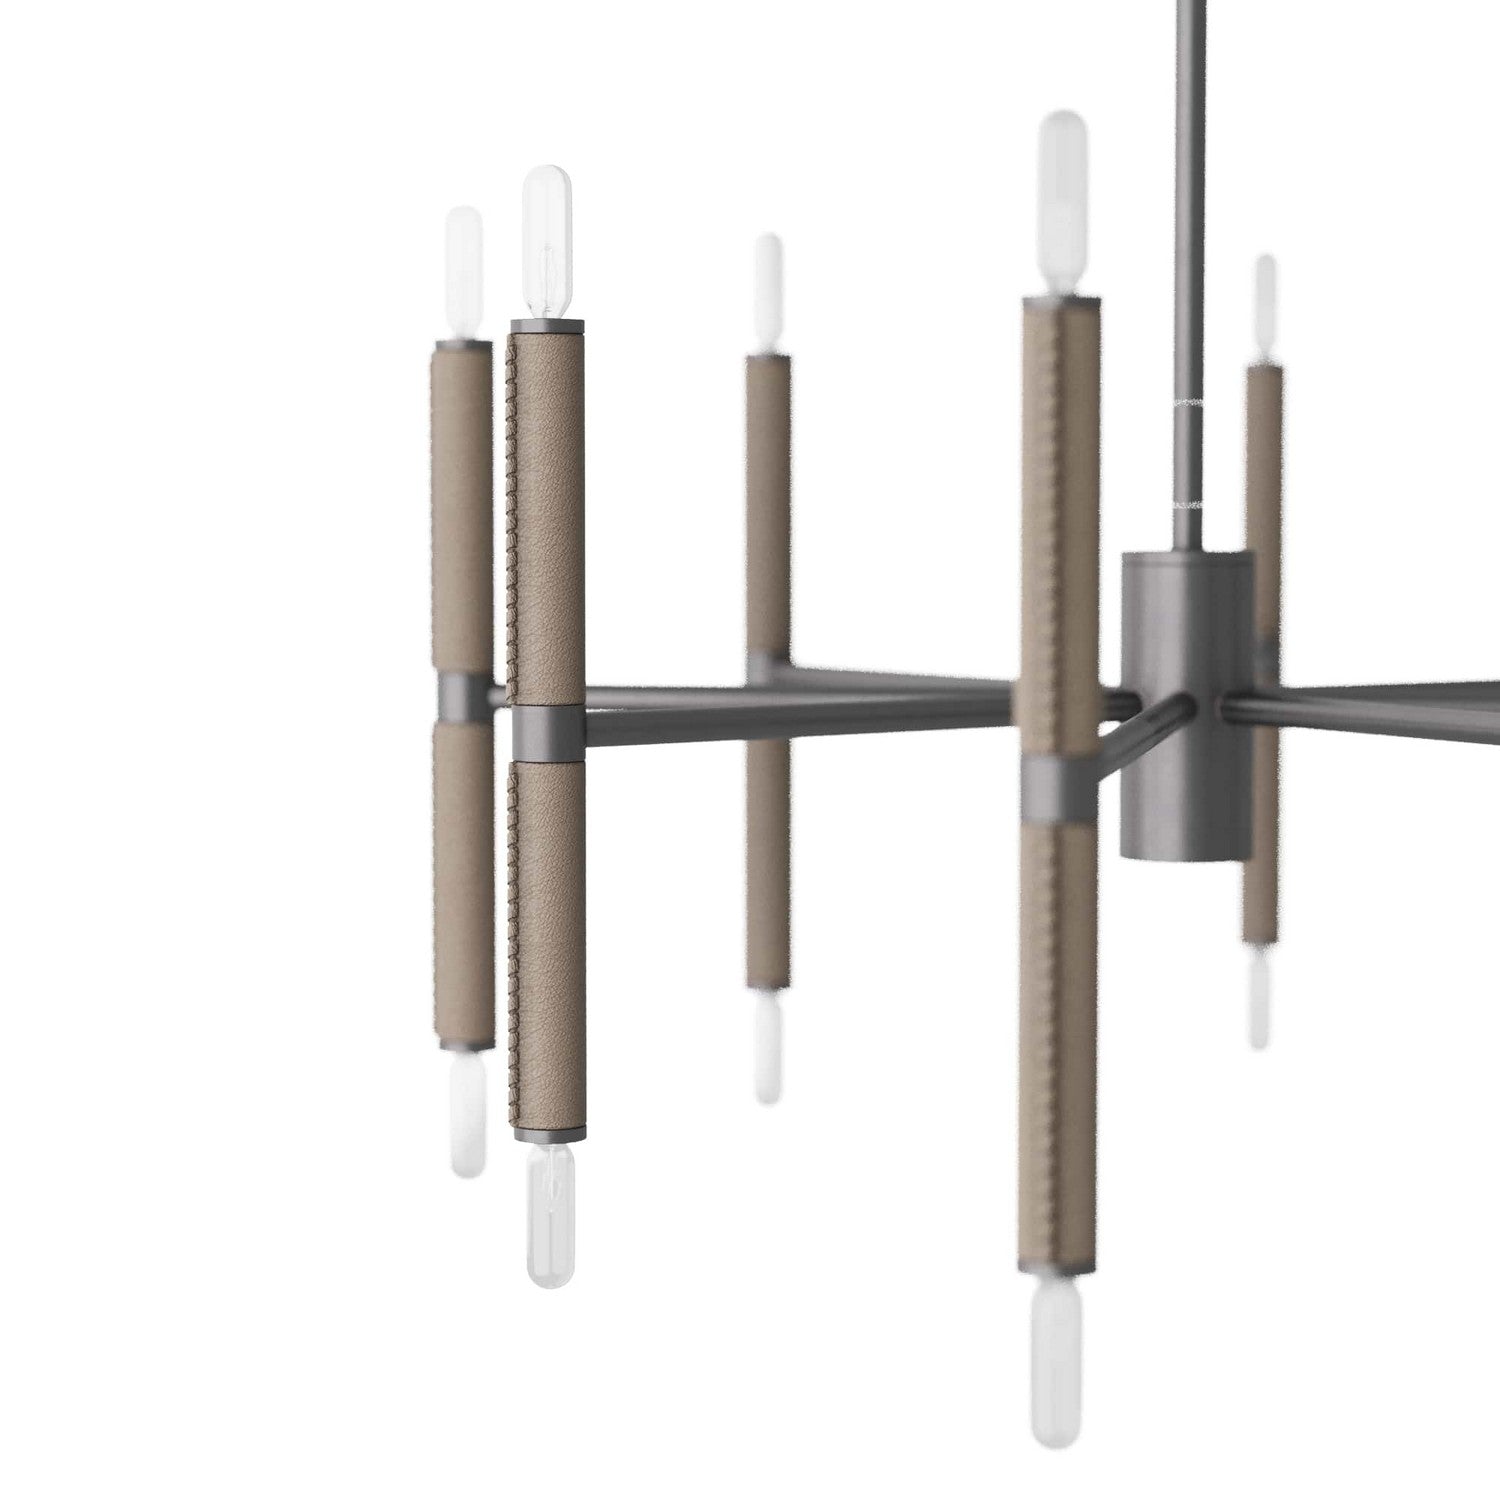 16 Light Chandelier from the Tilman collection in Dove finish